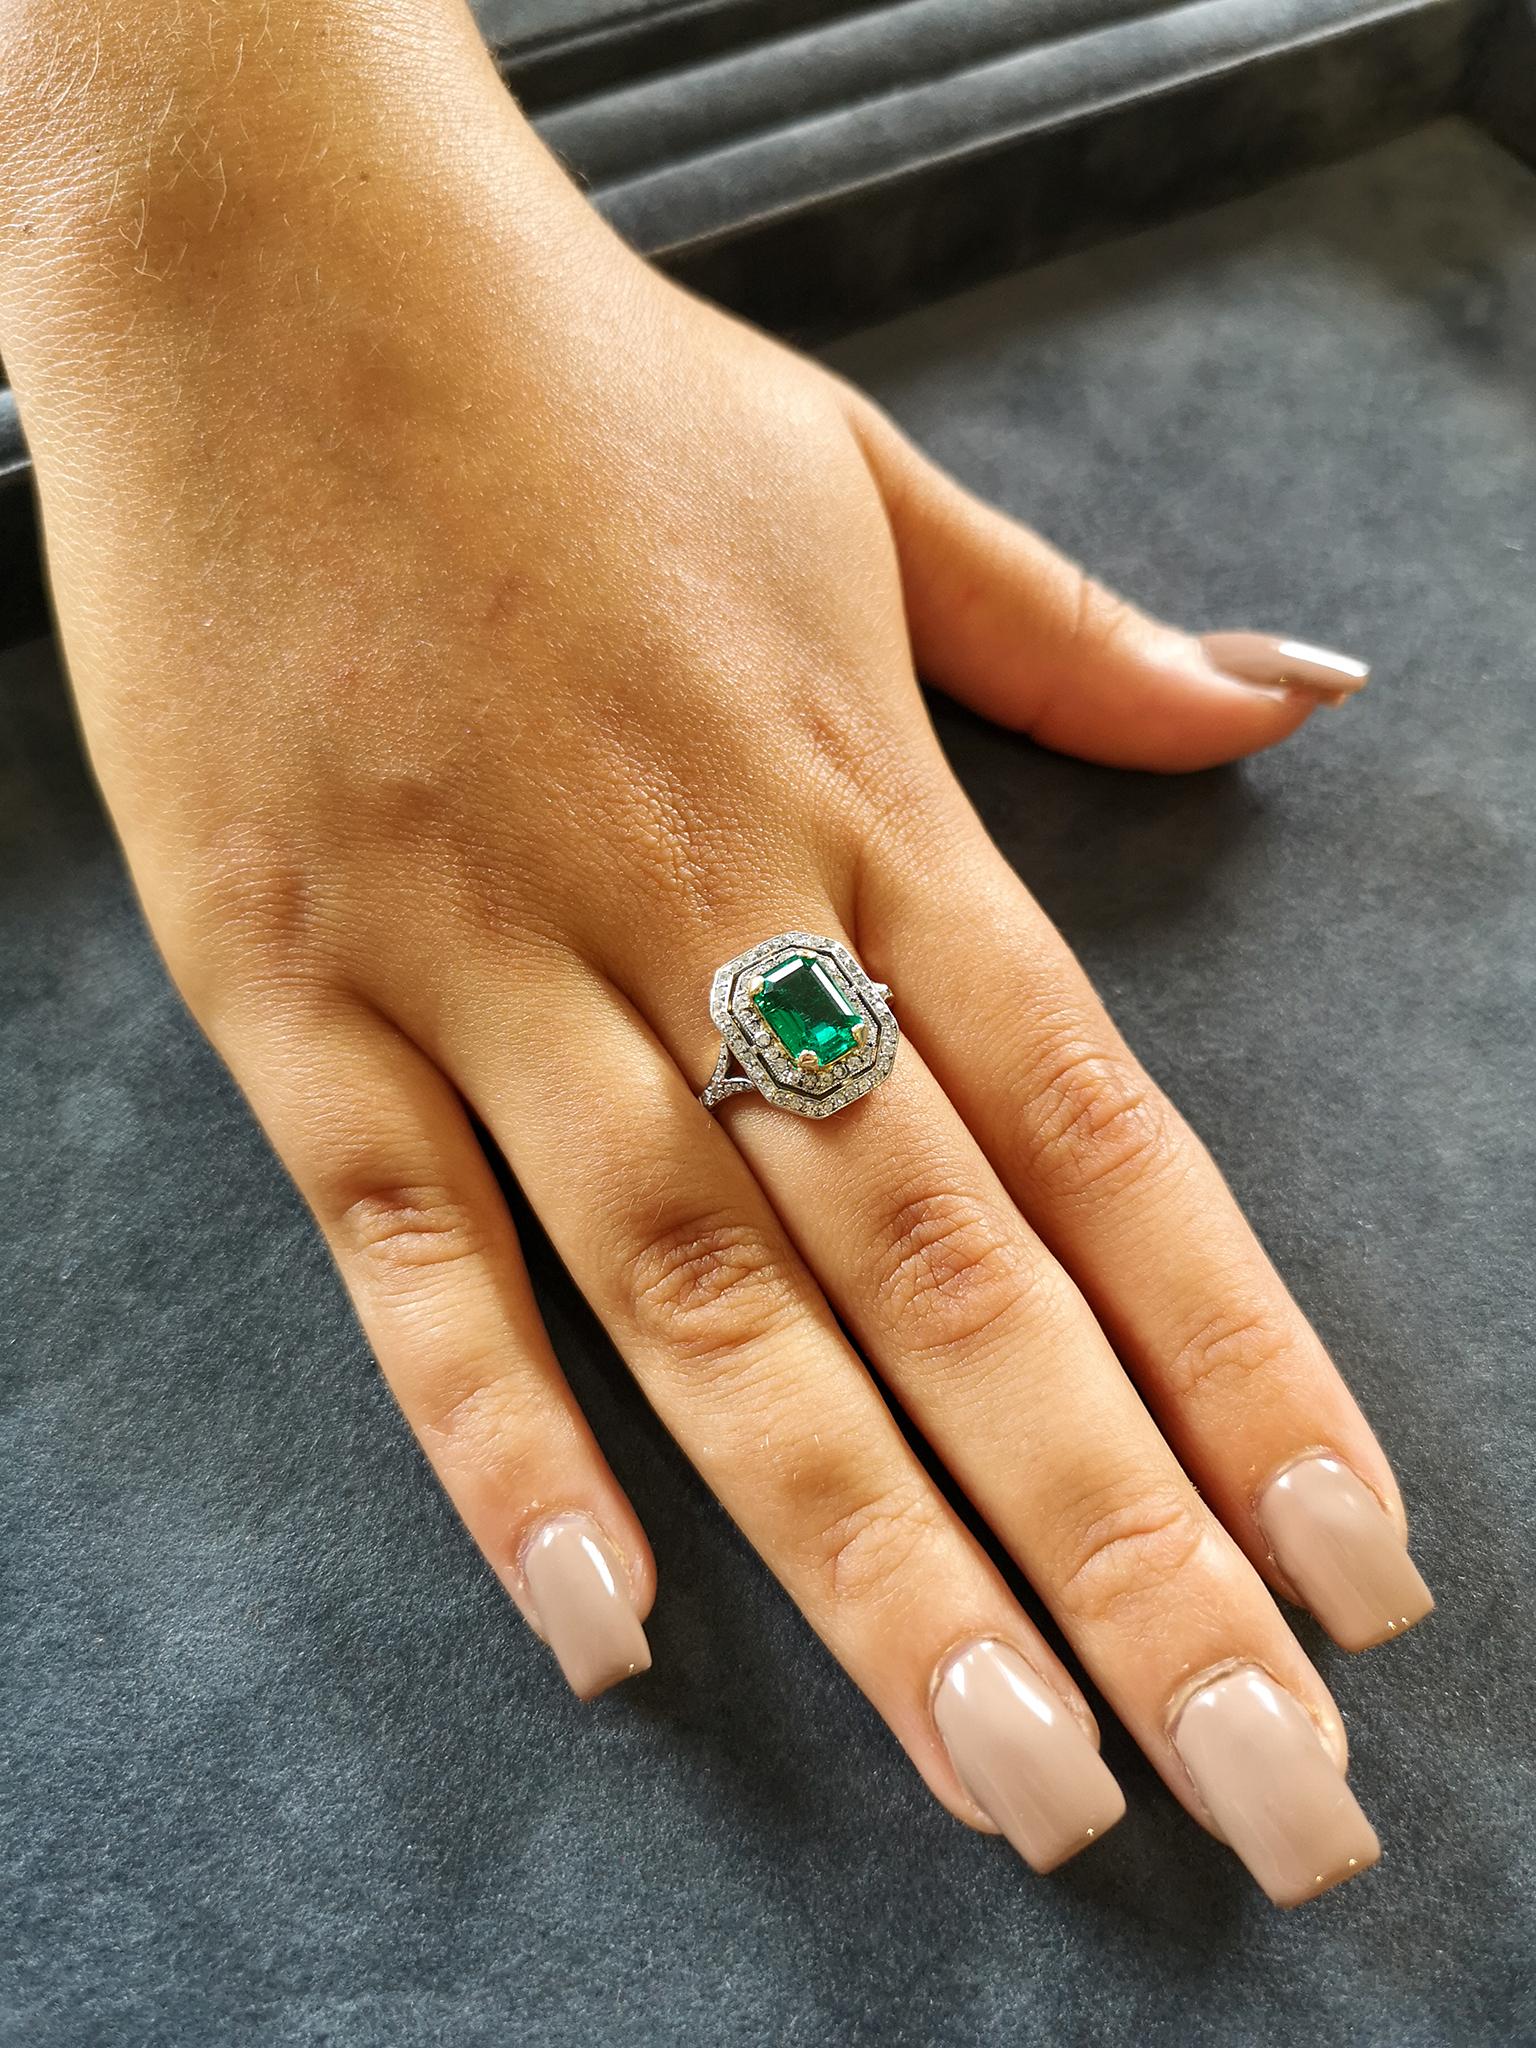 An exceptional antique cluster ring, circa 1905. The central emerald-cut emerald of astonishing colour and clarity, mounted in four 18-carat gold claws. Surrounded by a double row of bead-set old-cut diamonds. Bifurcated diamond set shoulders, lead